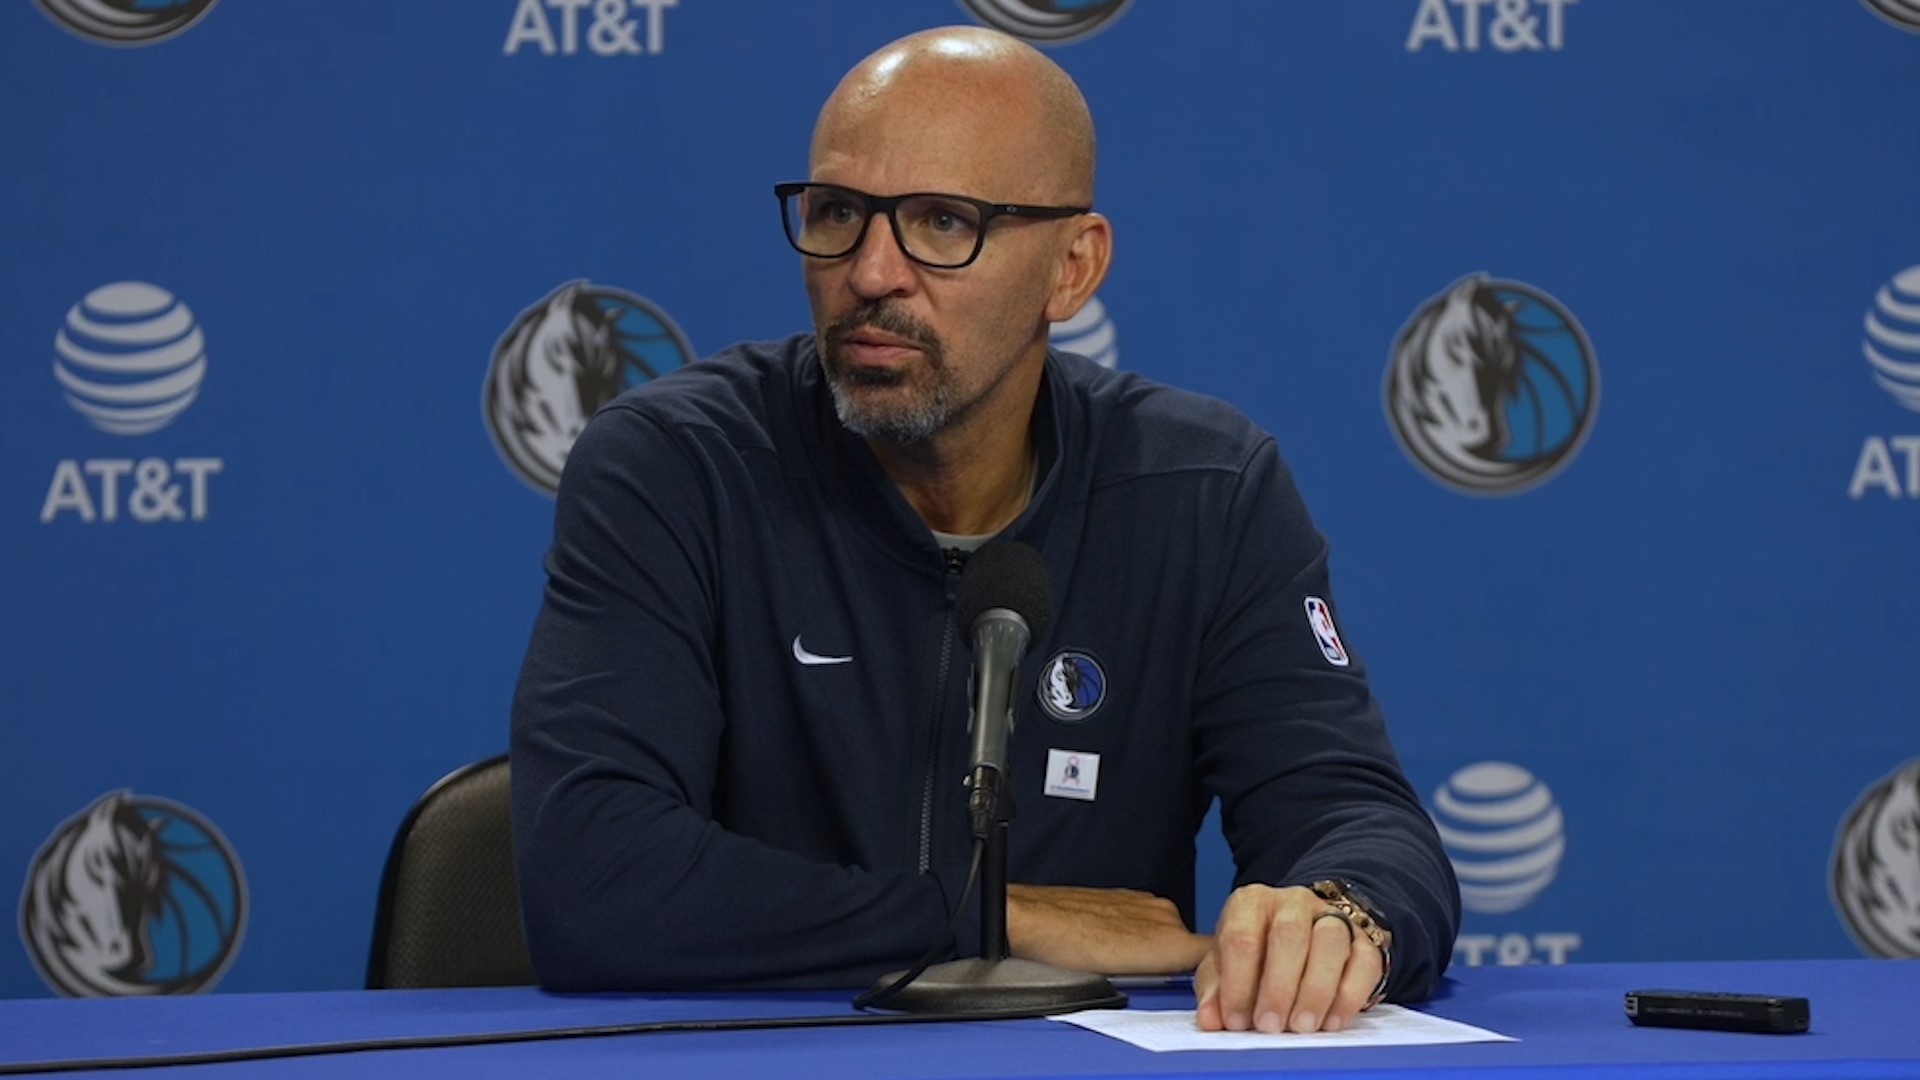 The Dallas Mavericks lost to the Toronto Raptors 127-116 on Nov. 8, 2023. Here is Mavs Head Coach Jason Kidd's media interview after the game.